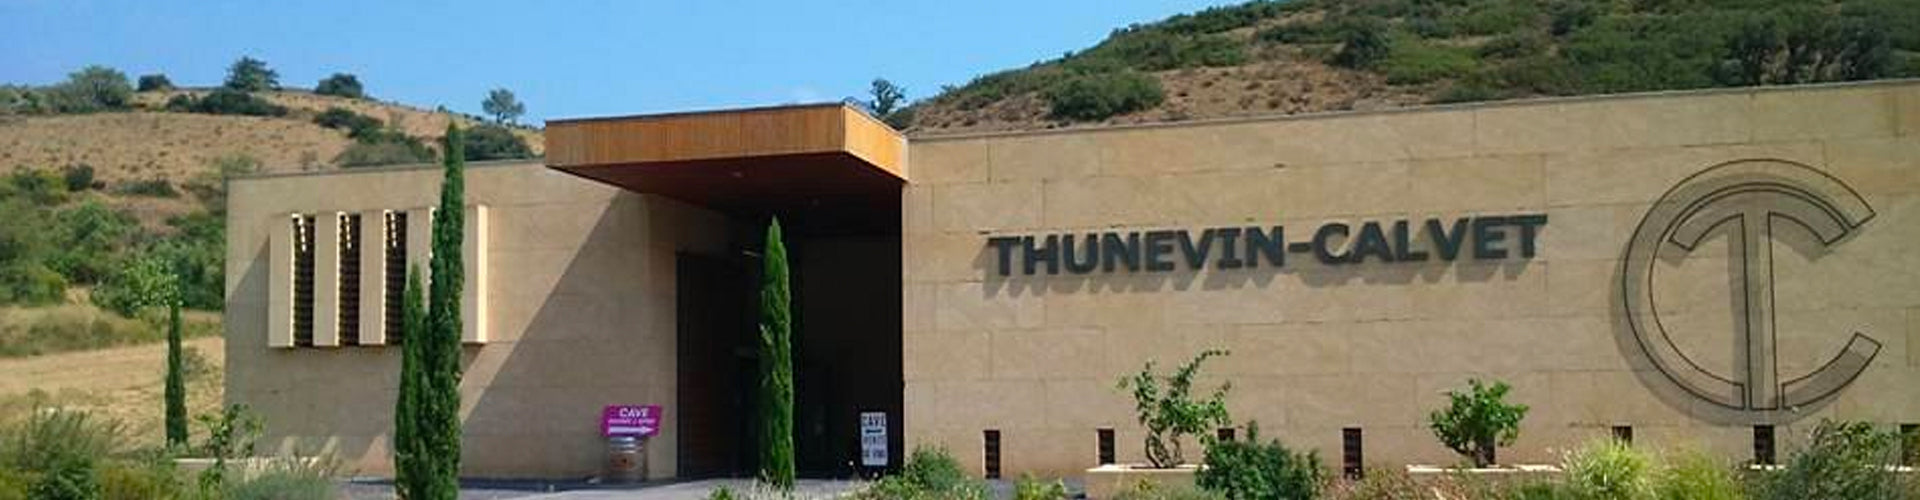 Entrance to the new Domaine Thunevin-Calvet winery building